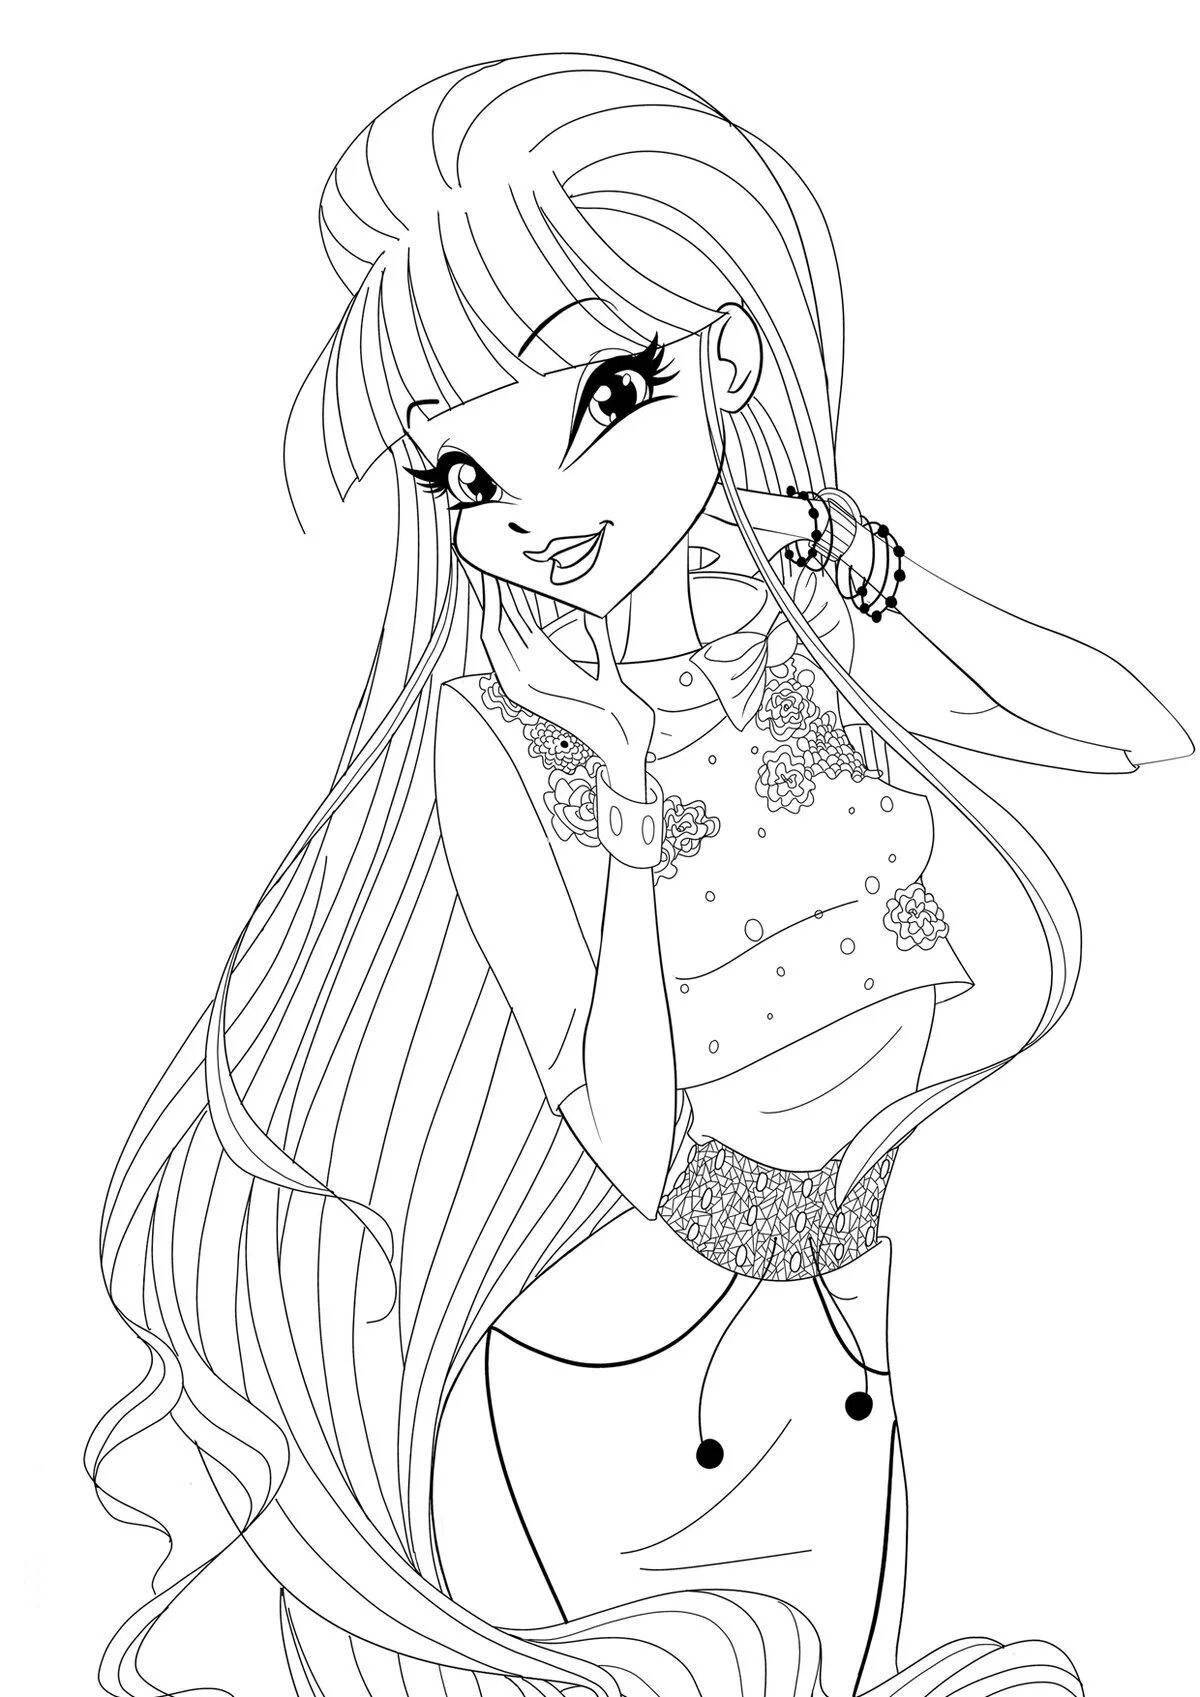 Winx dreamix fantasy coloring page